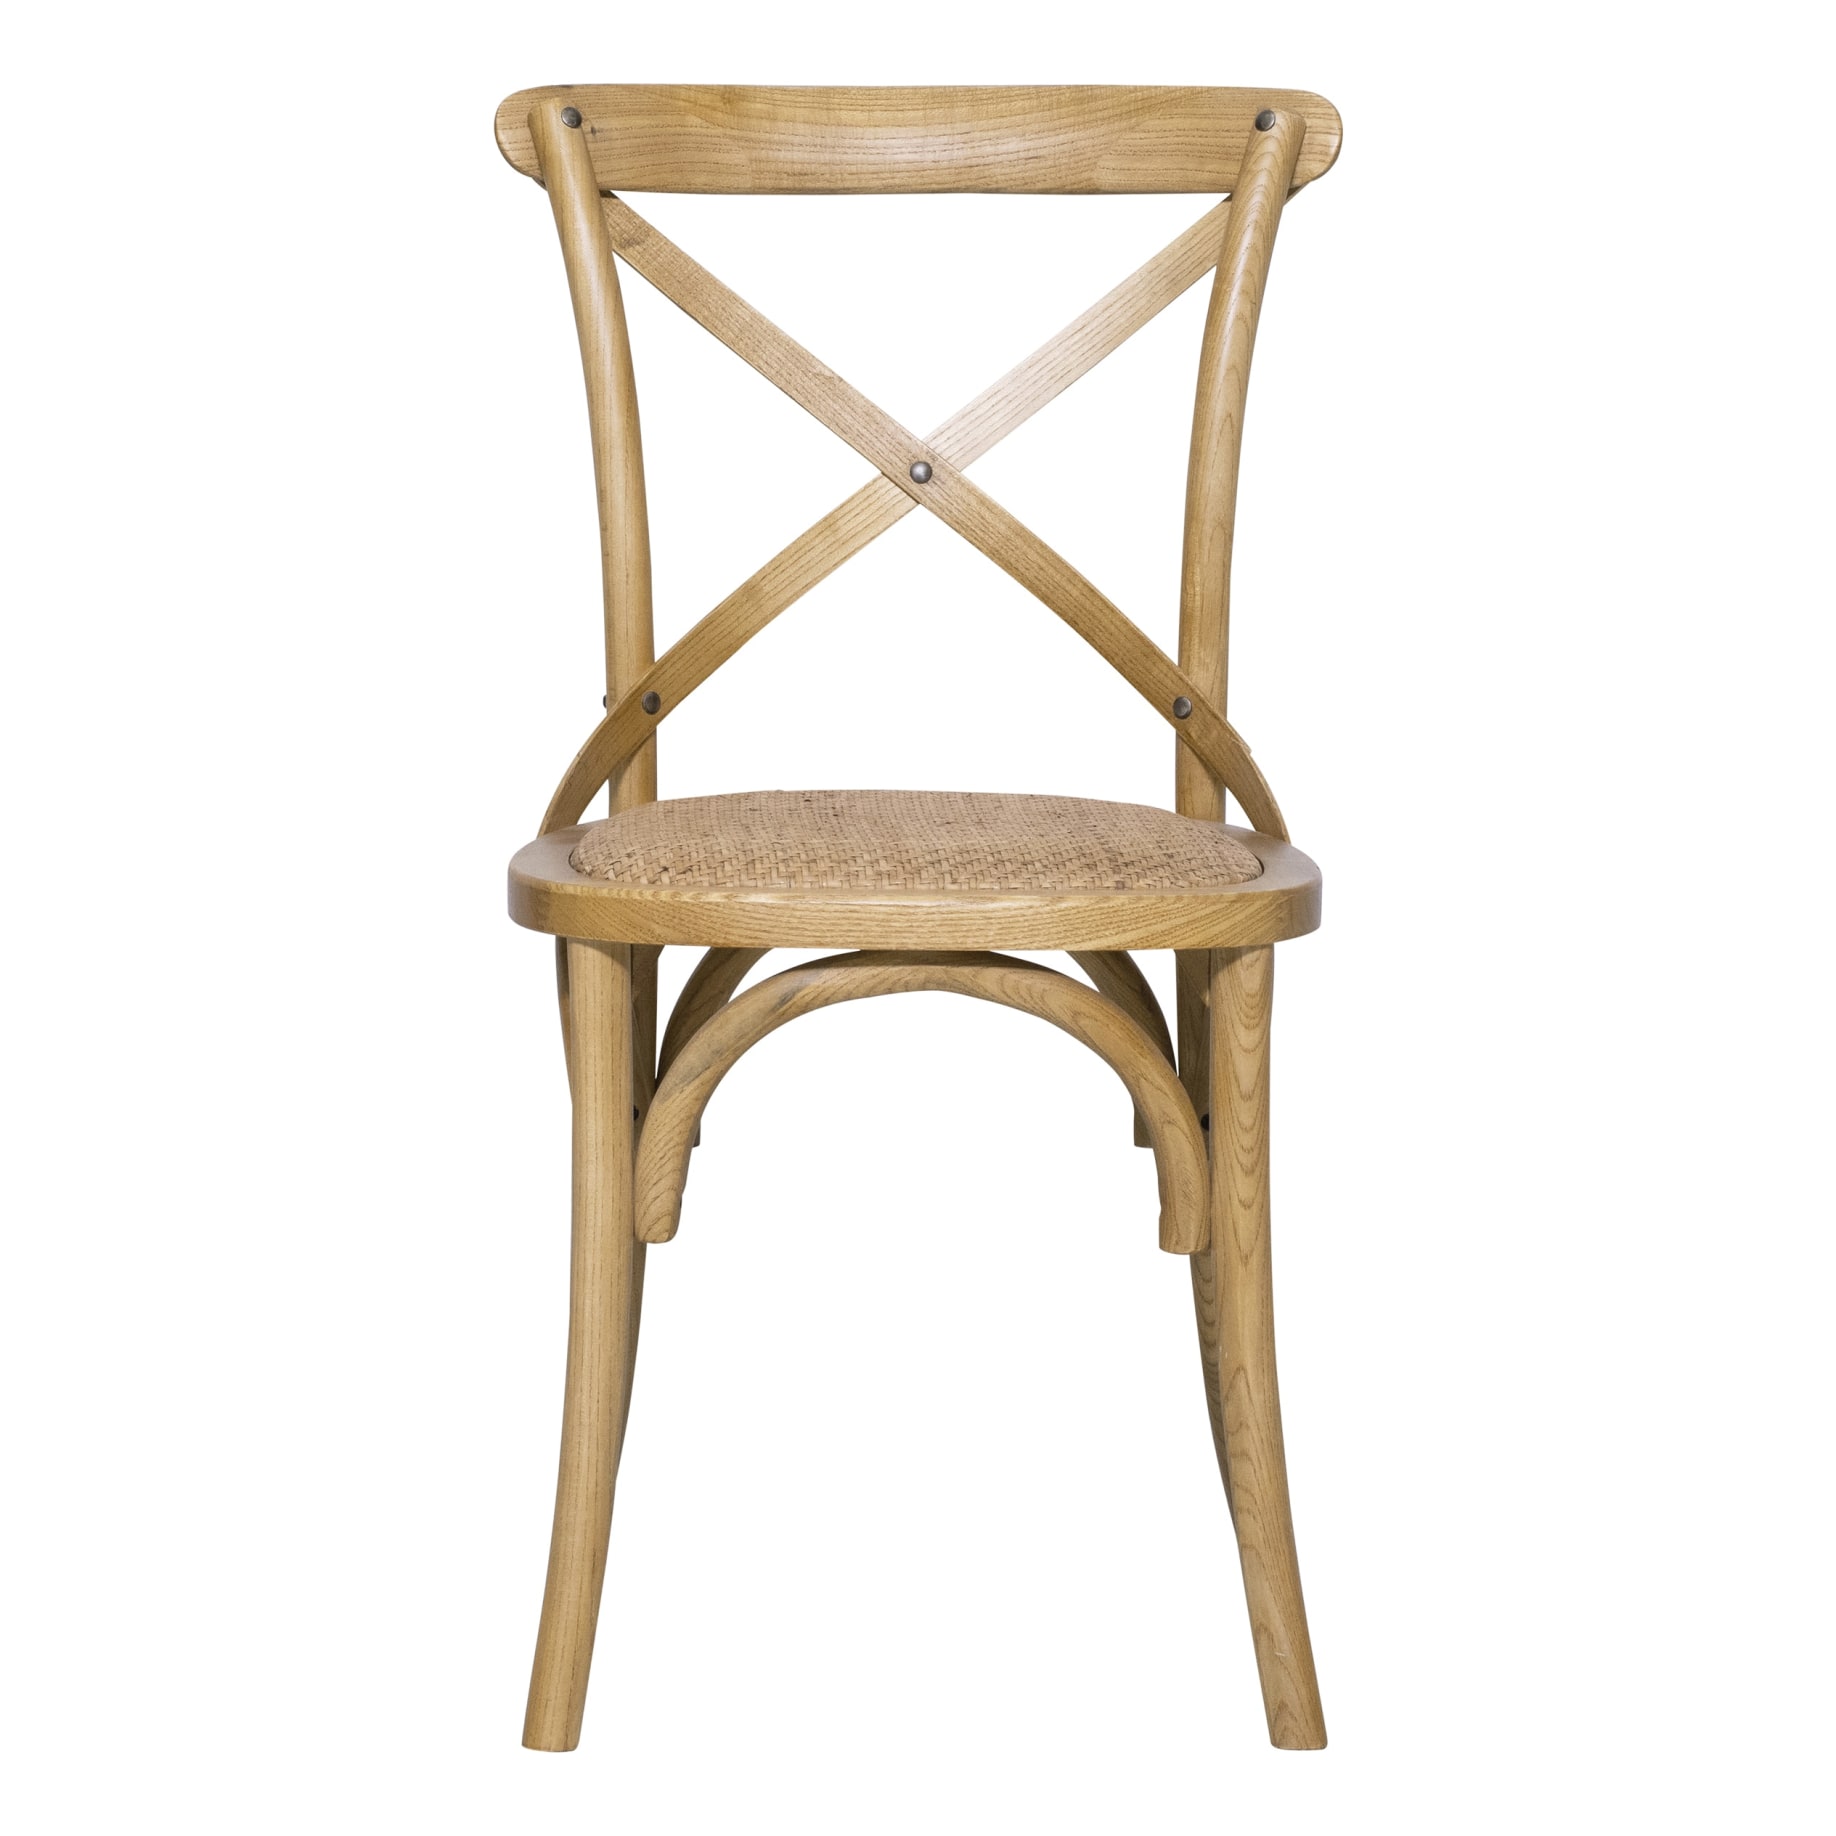 Cristo Cross Back Chair in Natural Oak Stain / Rattan